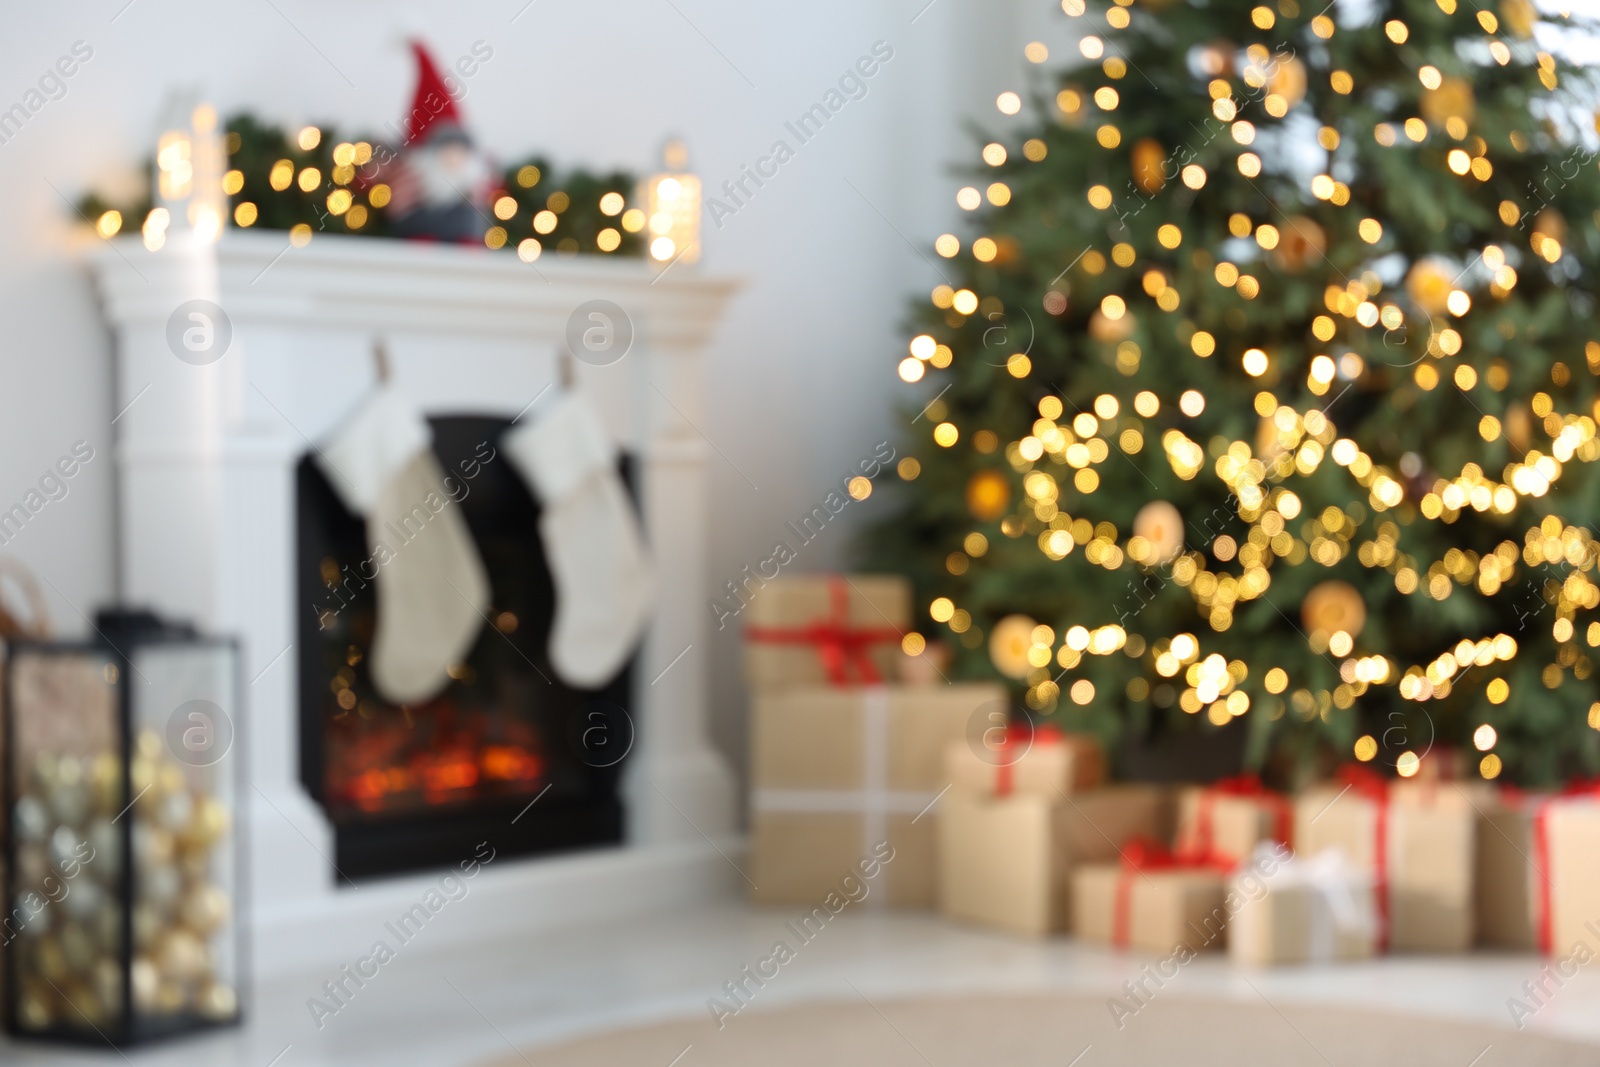 Photo of Blurred view of many different gift boxes under Christmas tree and festive decor in living room